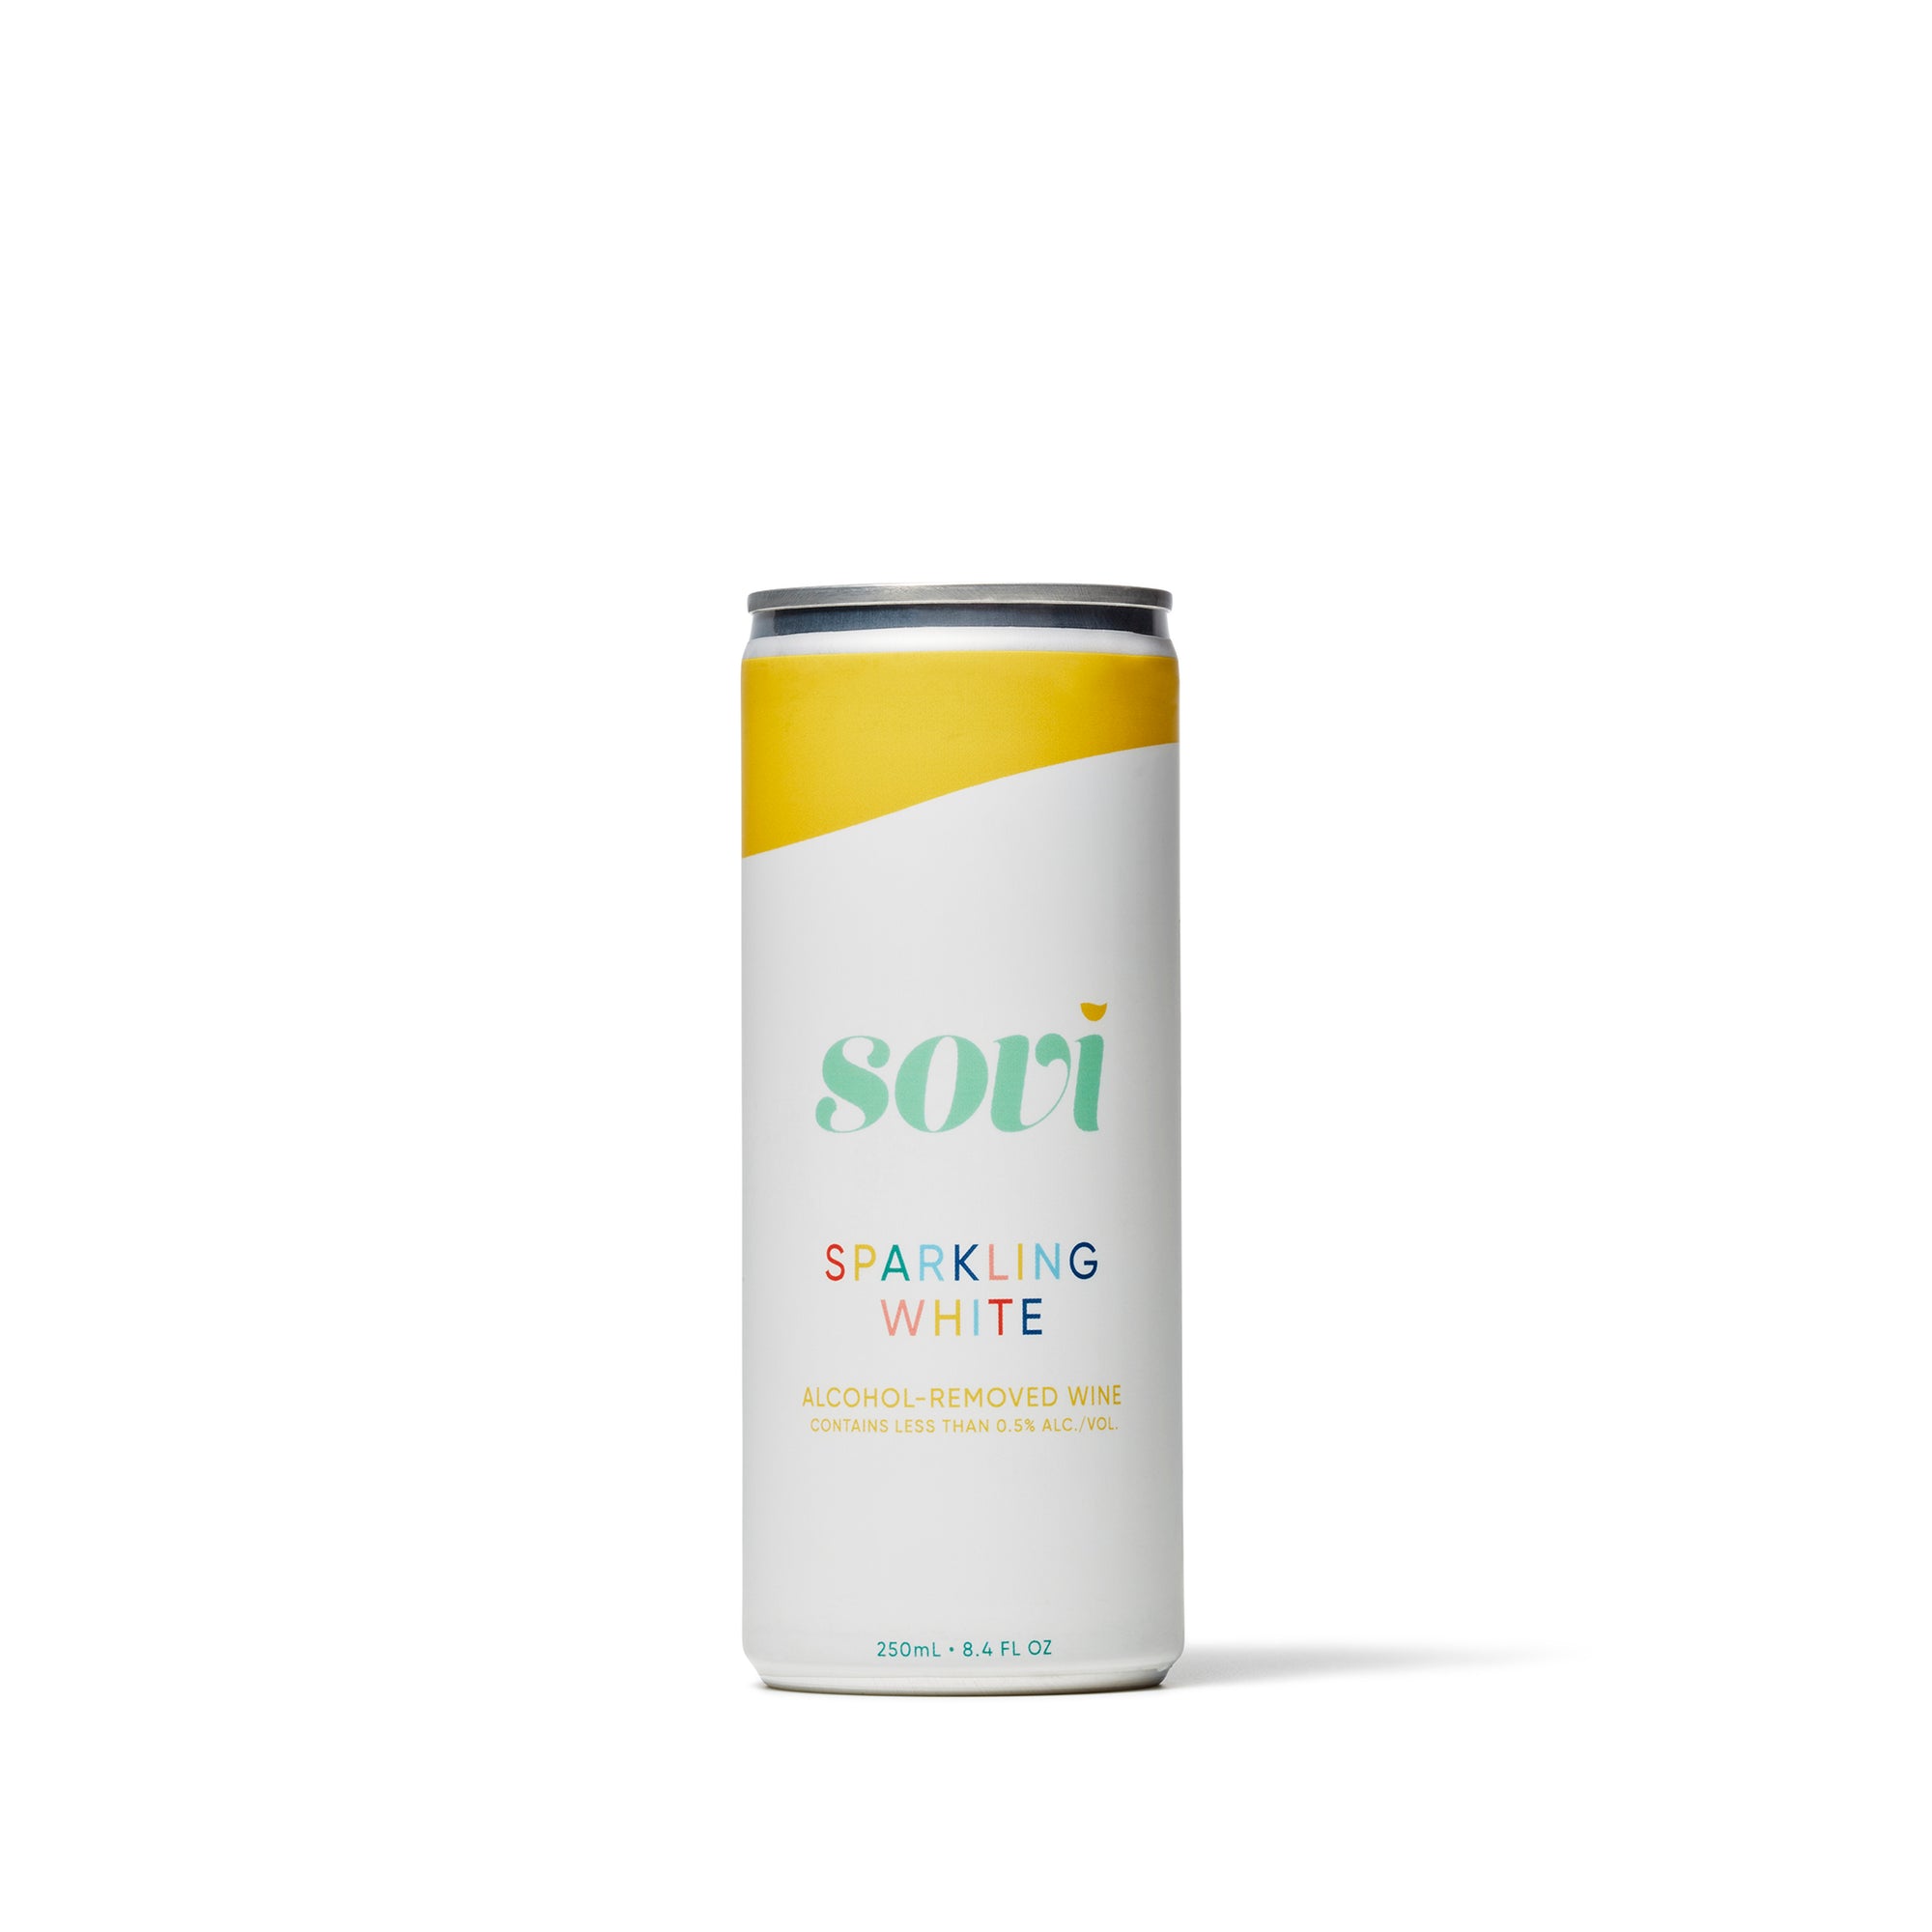 Sovi - Sparkling White - Single can - Boisson — Brooklyn's Non-Alcoholic Spirits, Beer, Wine, and Home Bar Shop in Cobble Hill